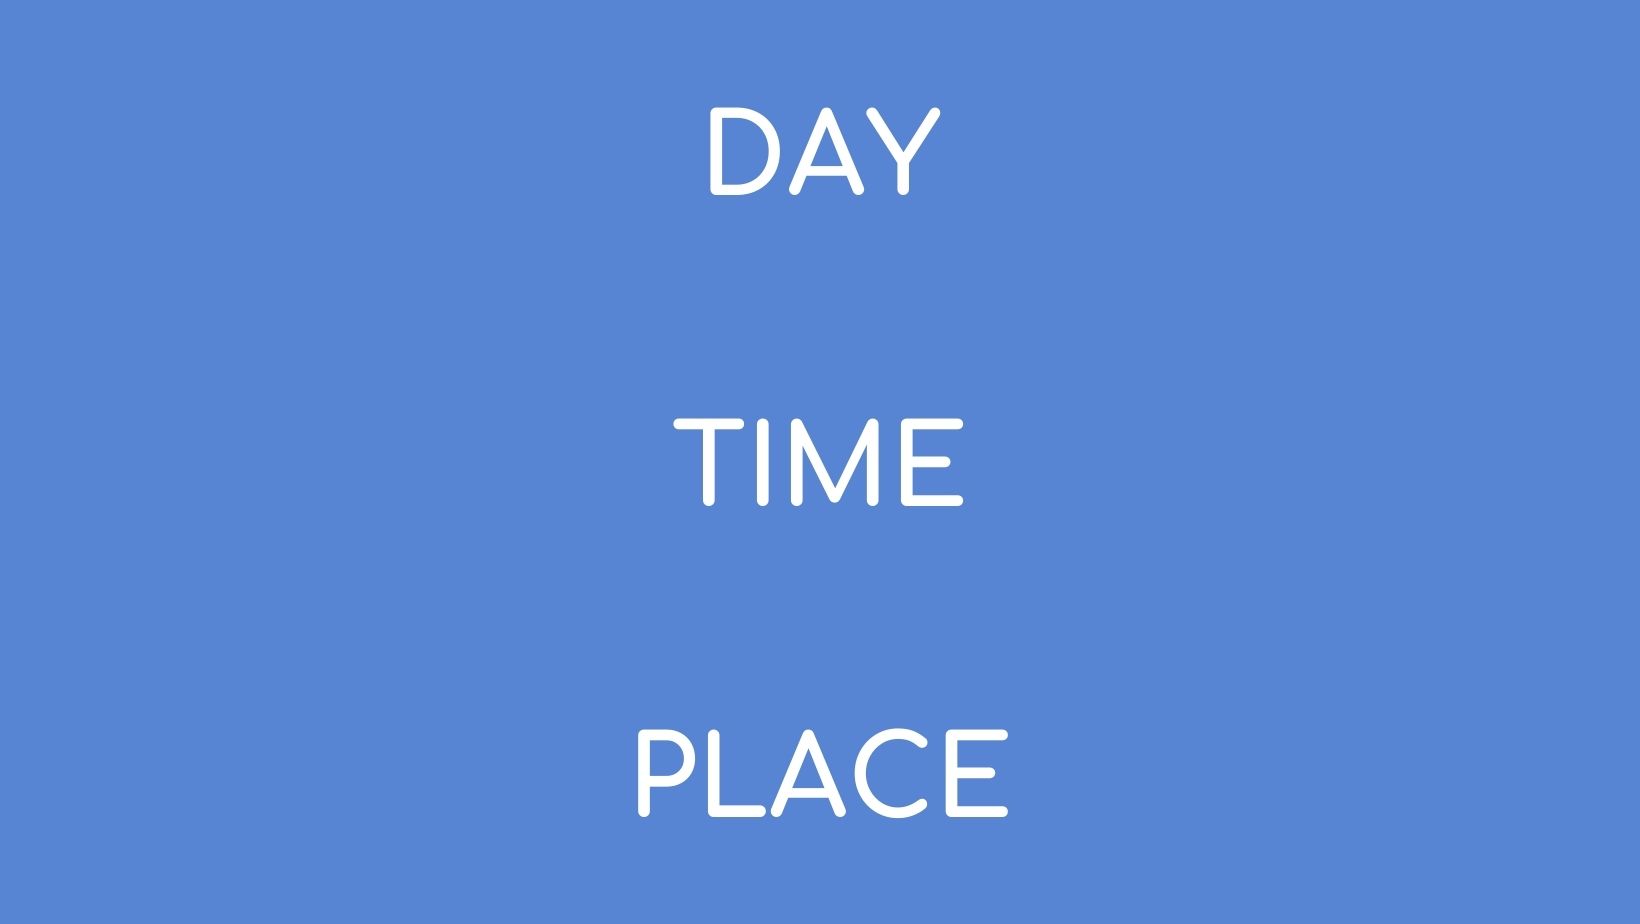 Set the Day, Time & Place you will exercise.